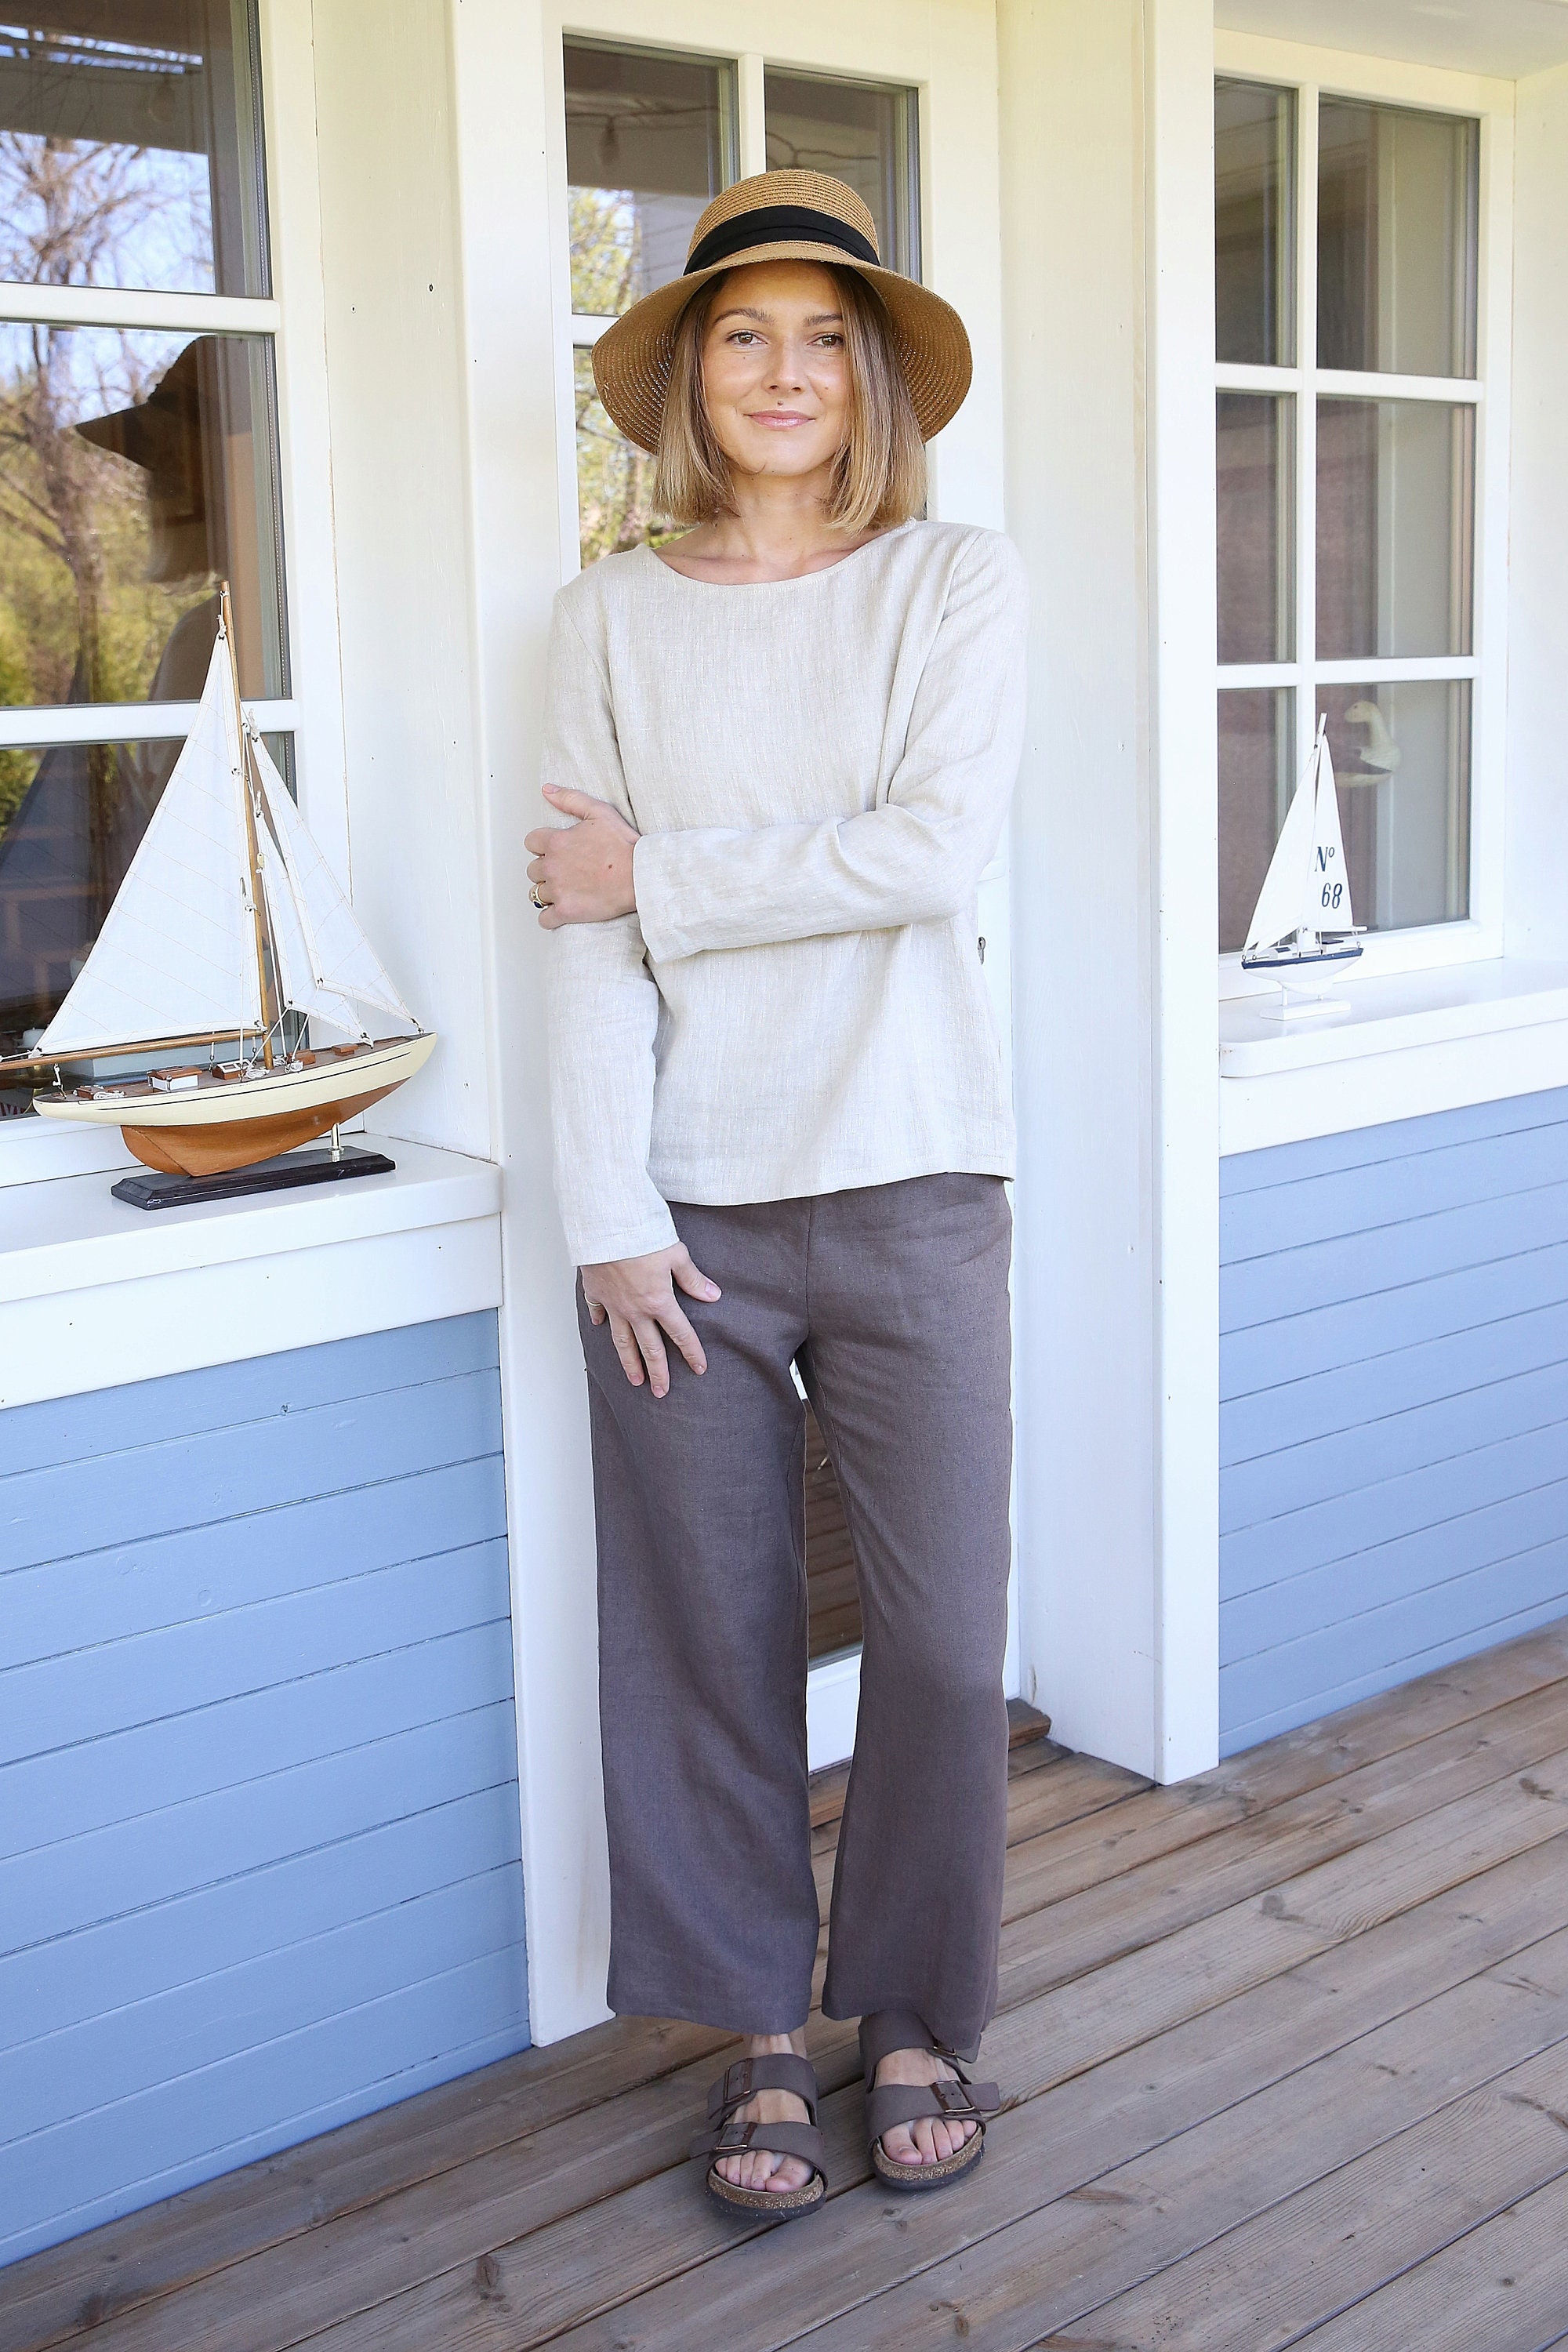 Straight Leg Linen Pants. Women's Trousers With an Elastic Waist. Relaxed  Fit Linen Pants With Pockets. Linen Pantaloons. Mid Rise Waist. -   Canada